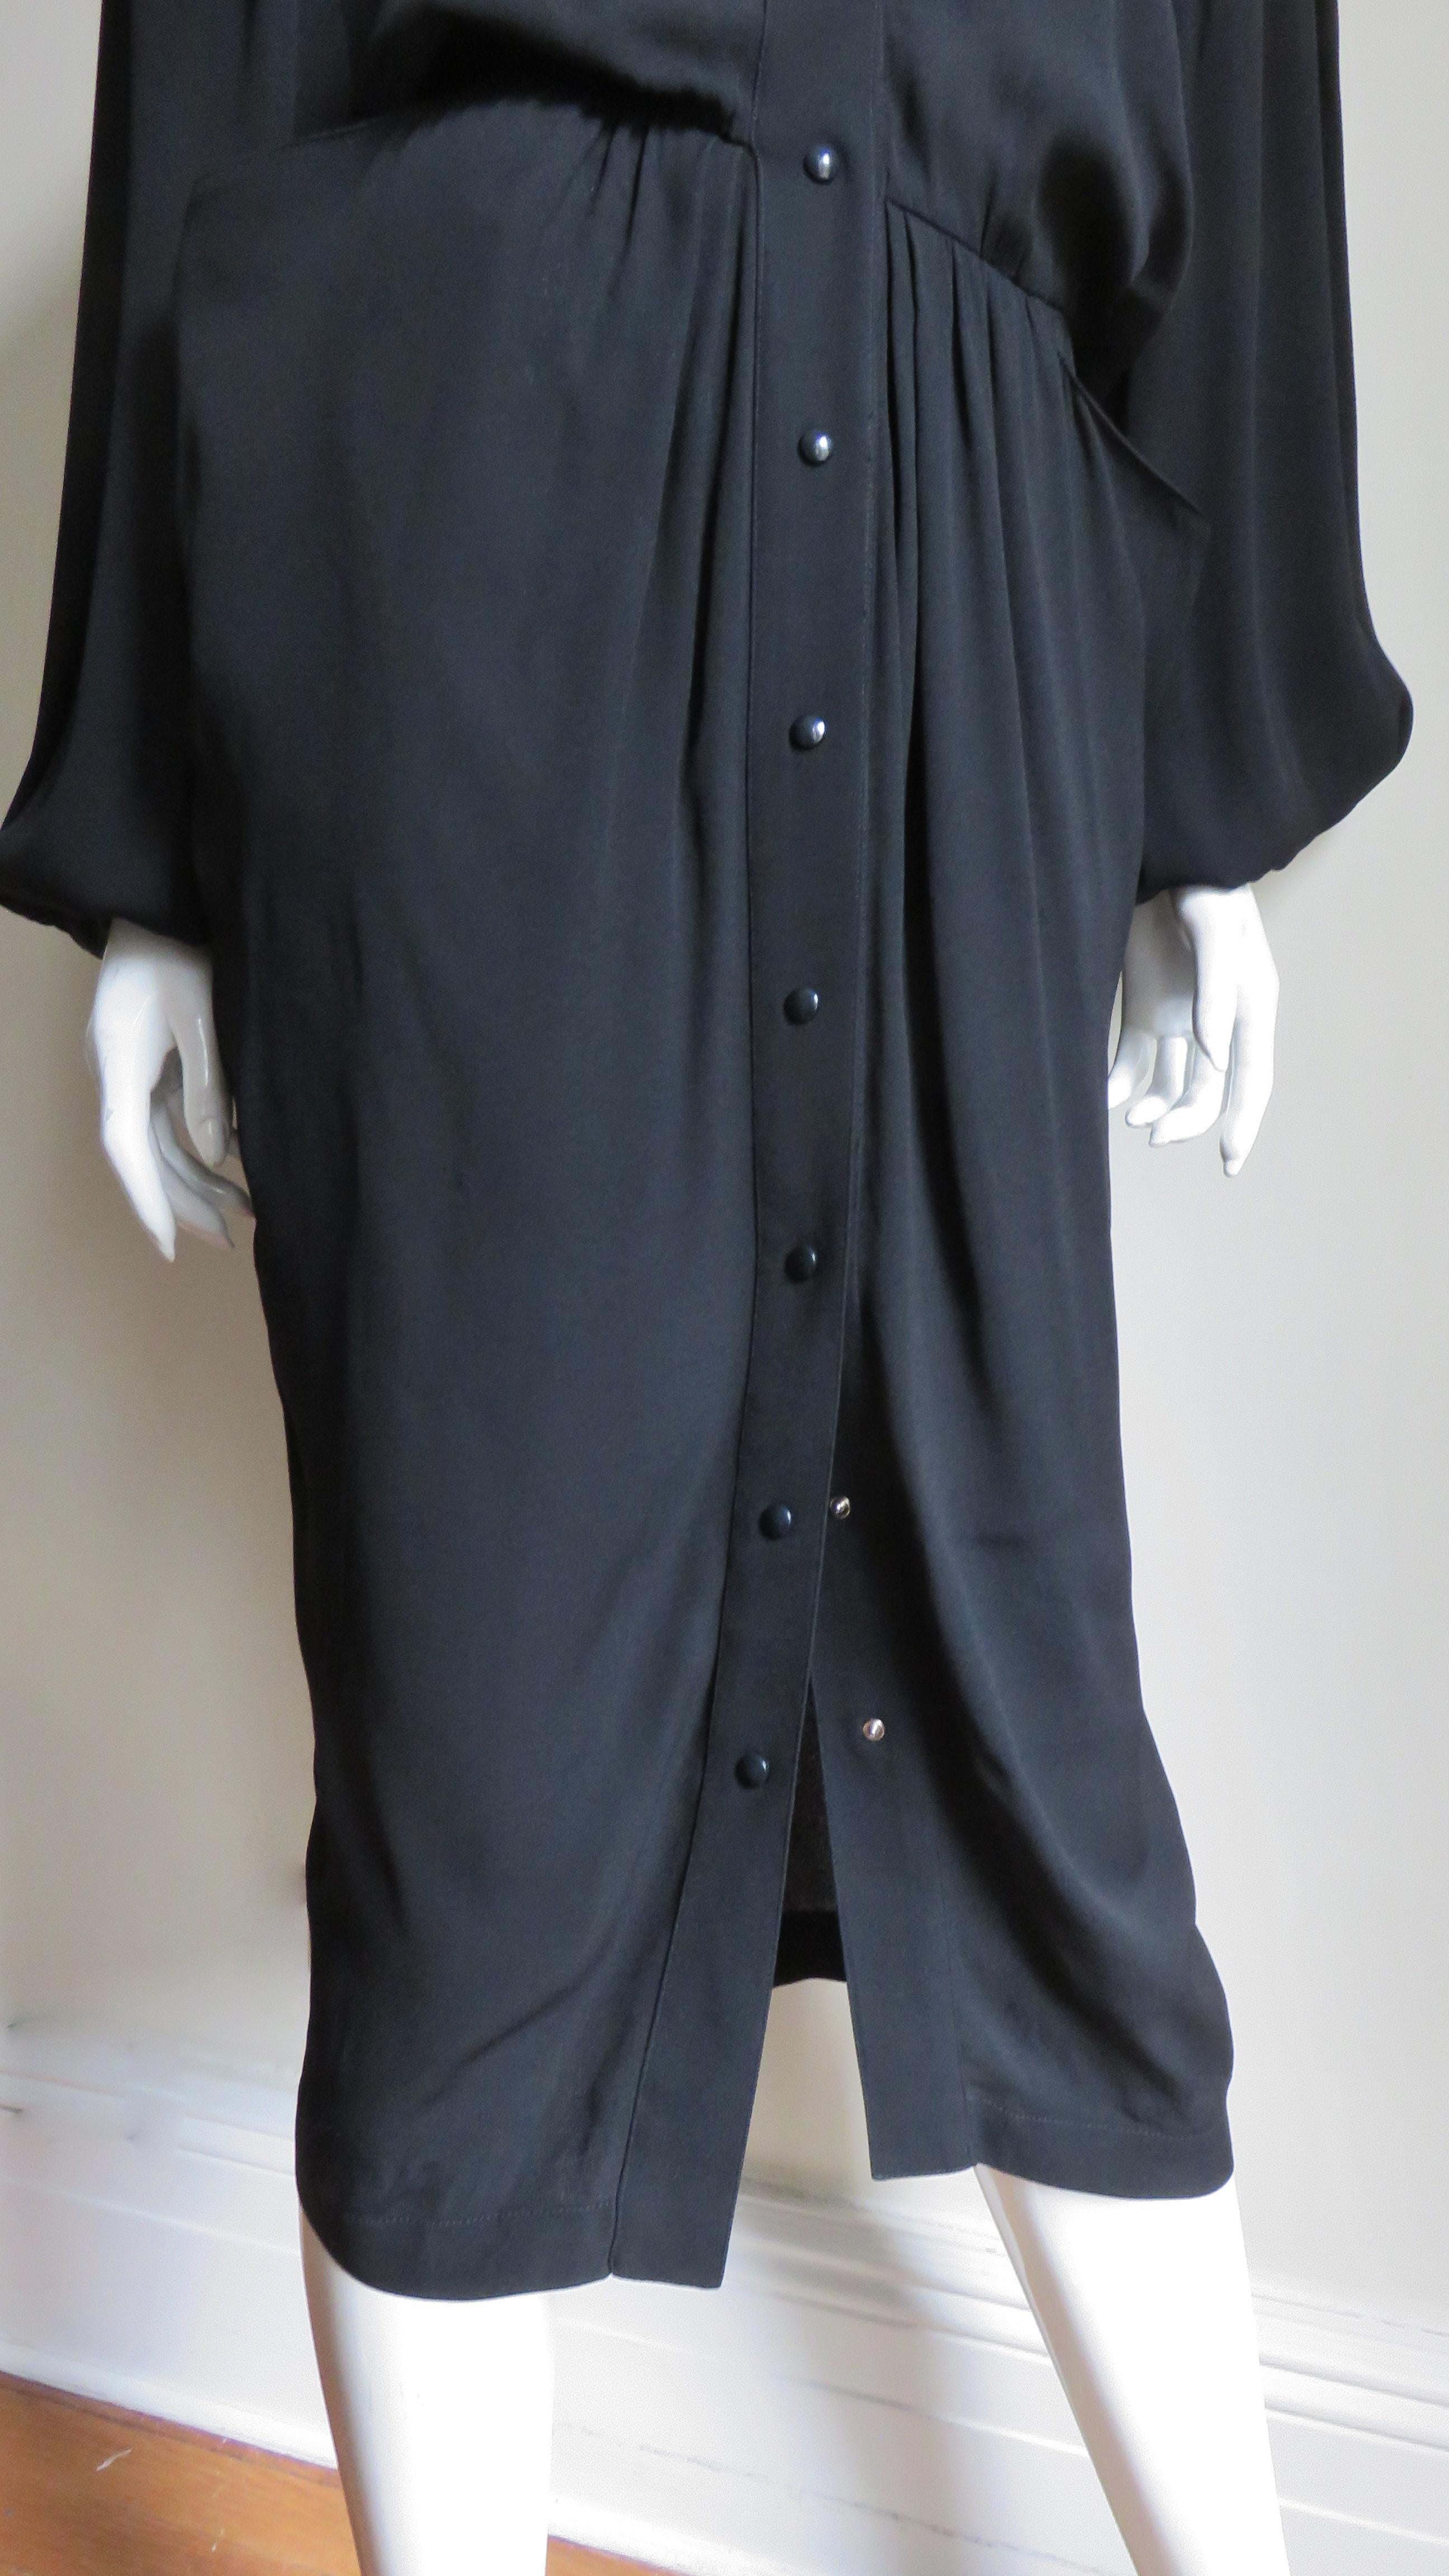 Thierry Mugler Western Influence Shirtwaist Dress In Good Condition For Sale In Water Mill, NY